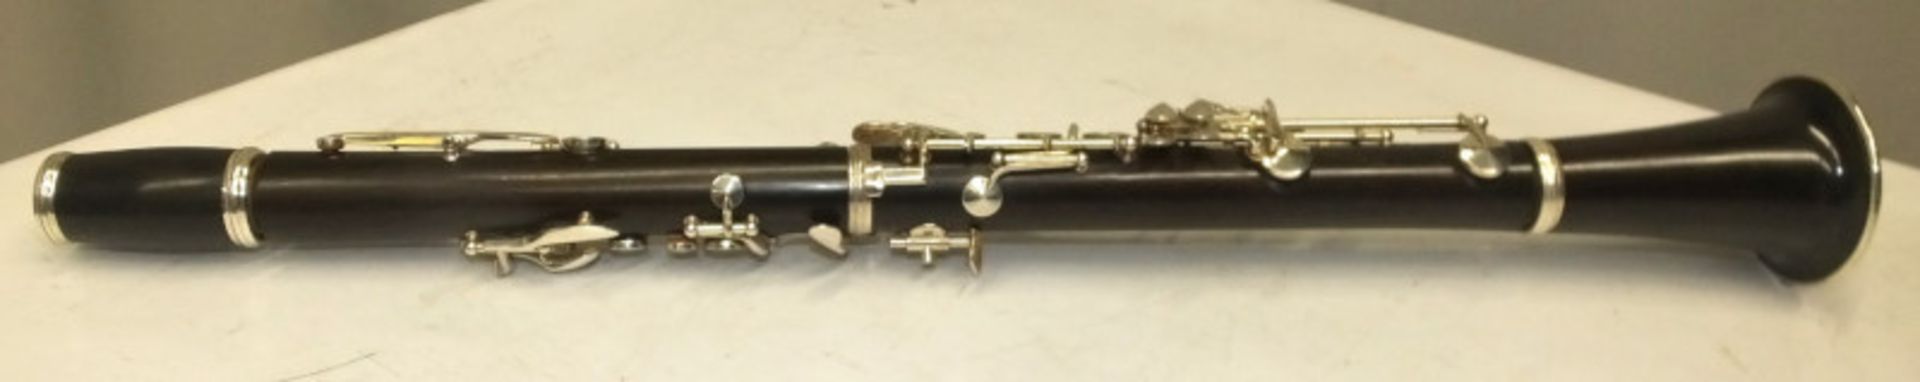 Howarth S2 Clarinet in case - Serial Number - 2228. - Image 15 of 17